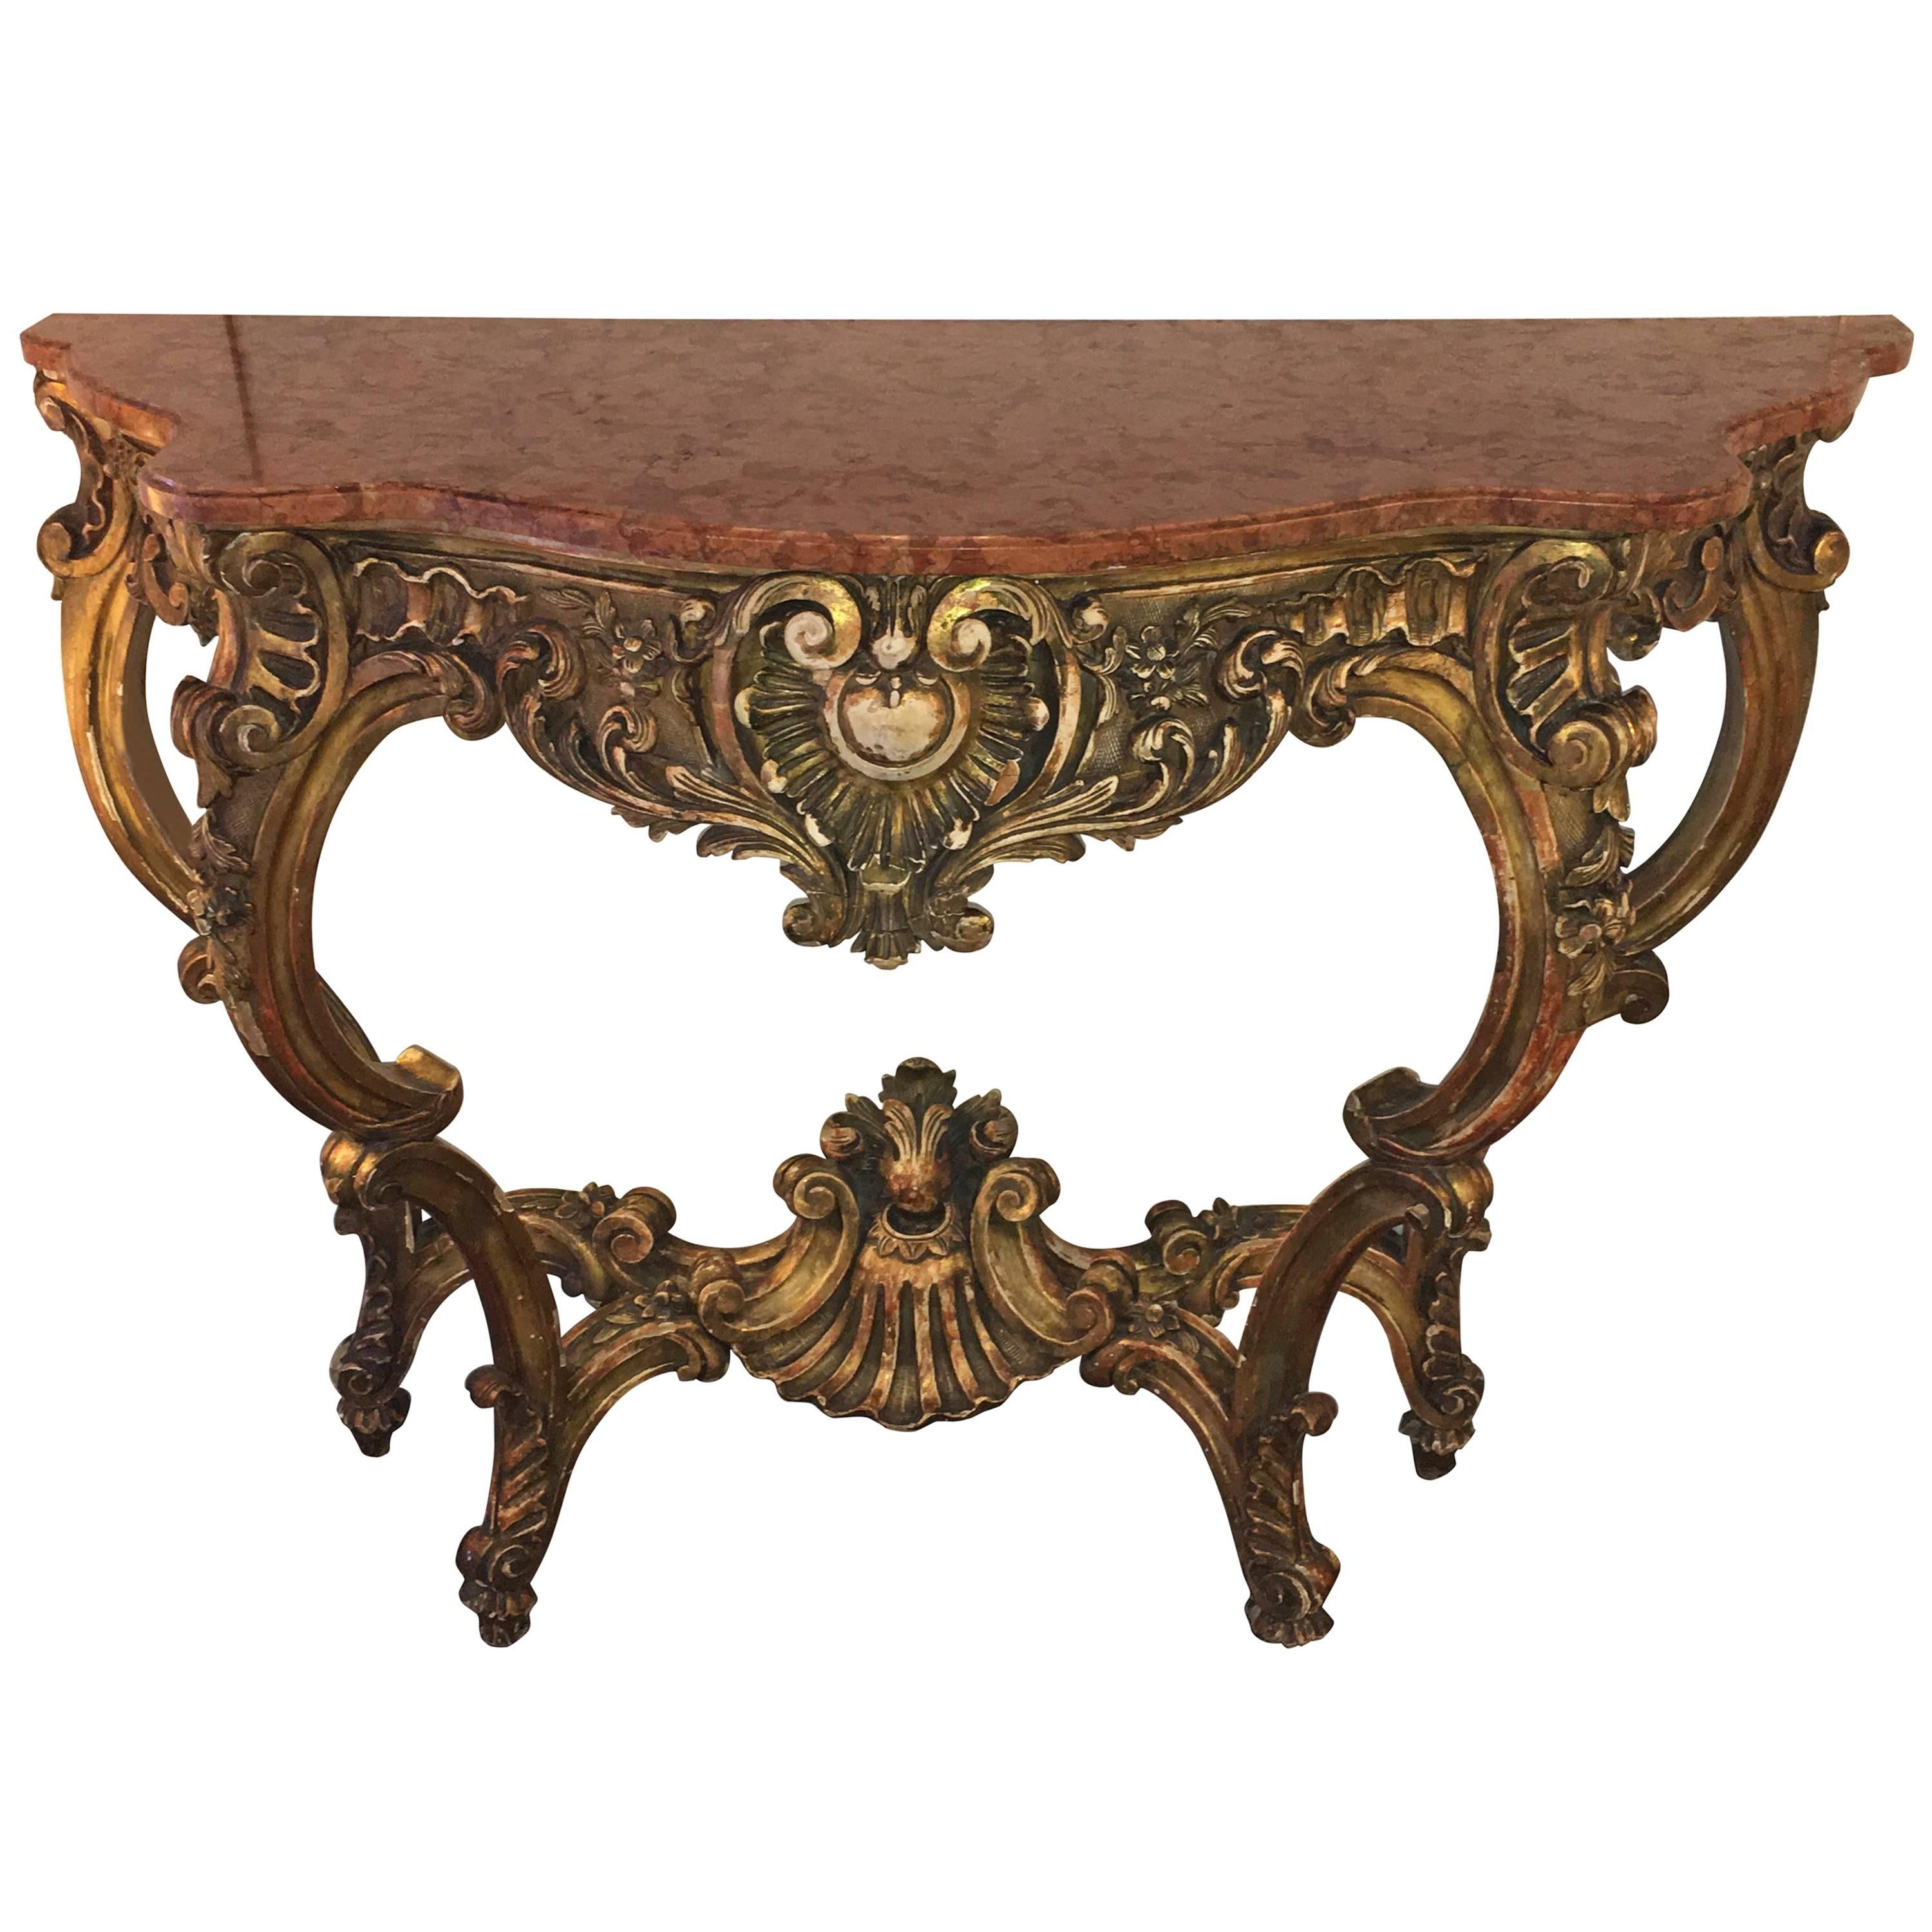 Stamped Jansen French Rococo Style Marble Top Console